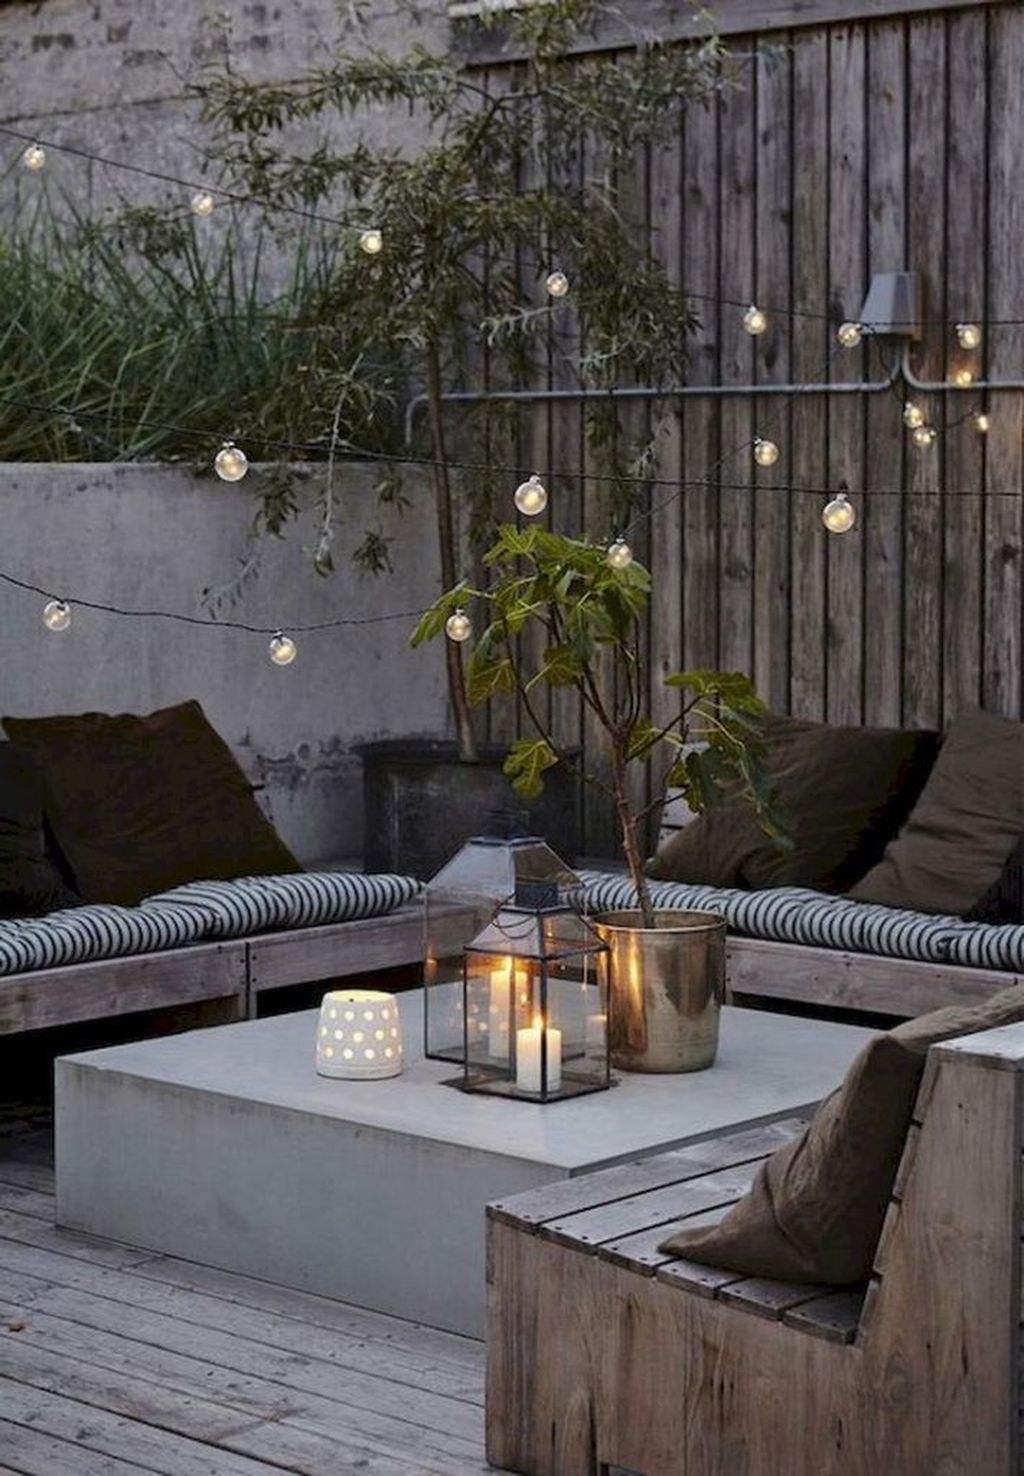 Simple Terrace Ideas You Can Try12